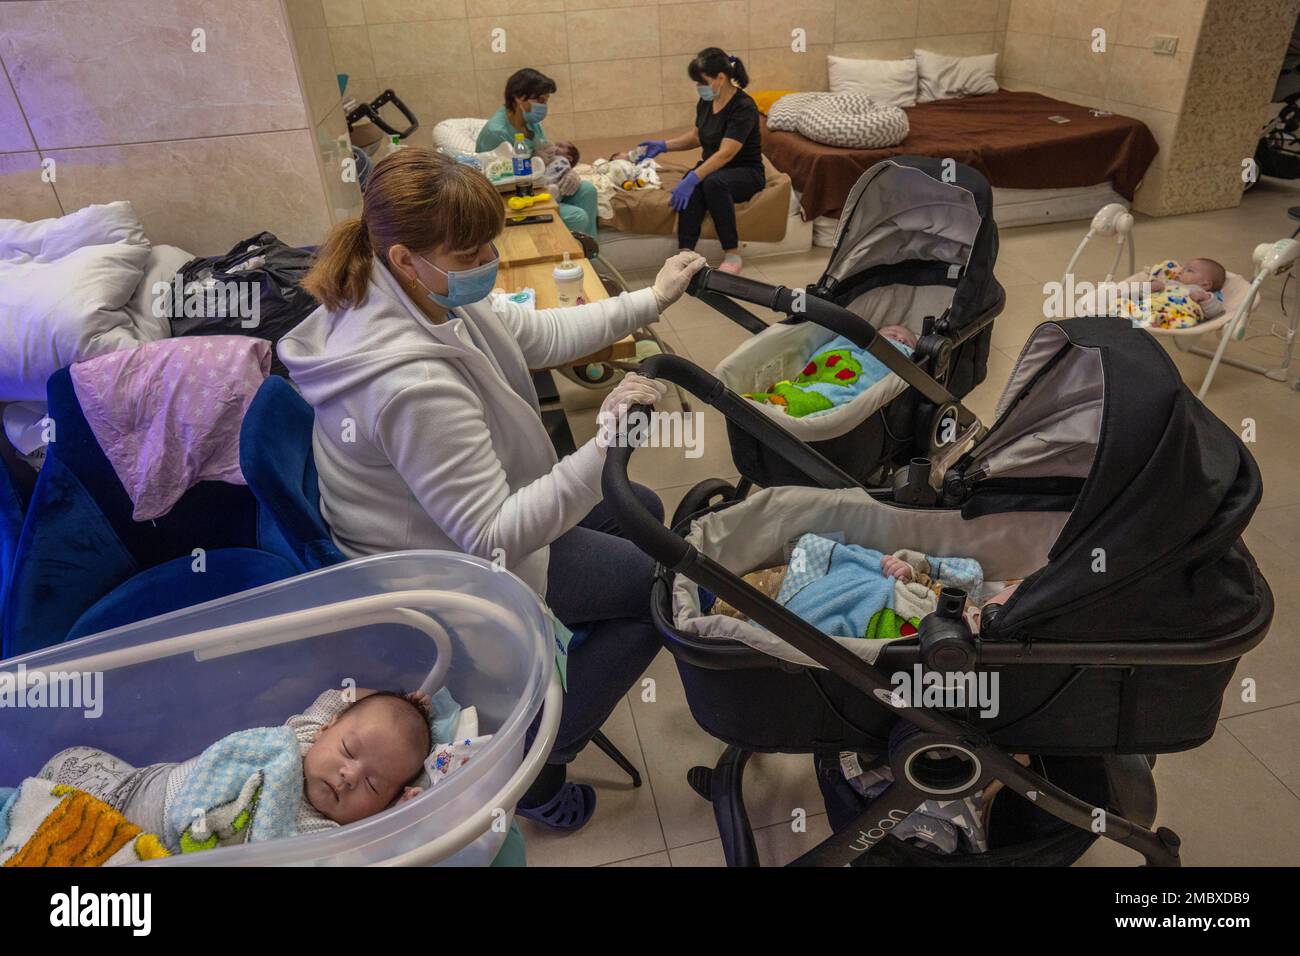 Nannies take care of newborn babies in a basement converted into a nursery  in Kyiv, Ukraine, Saturday, March 19, 2022. Nineteen surrogated babies were  born to surrogate mothers, with their biological parents